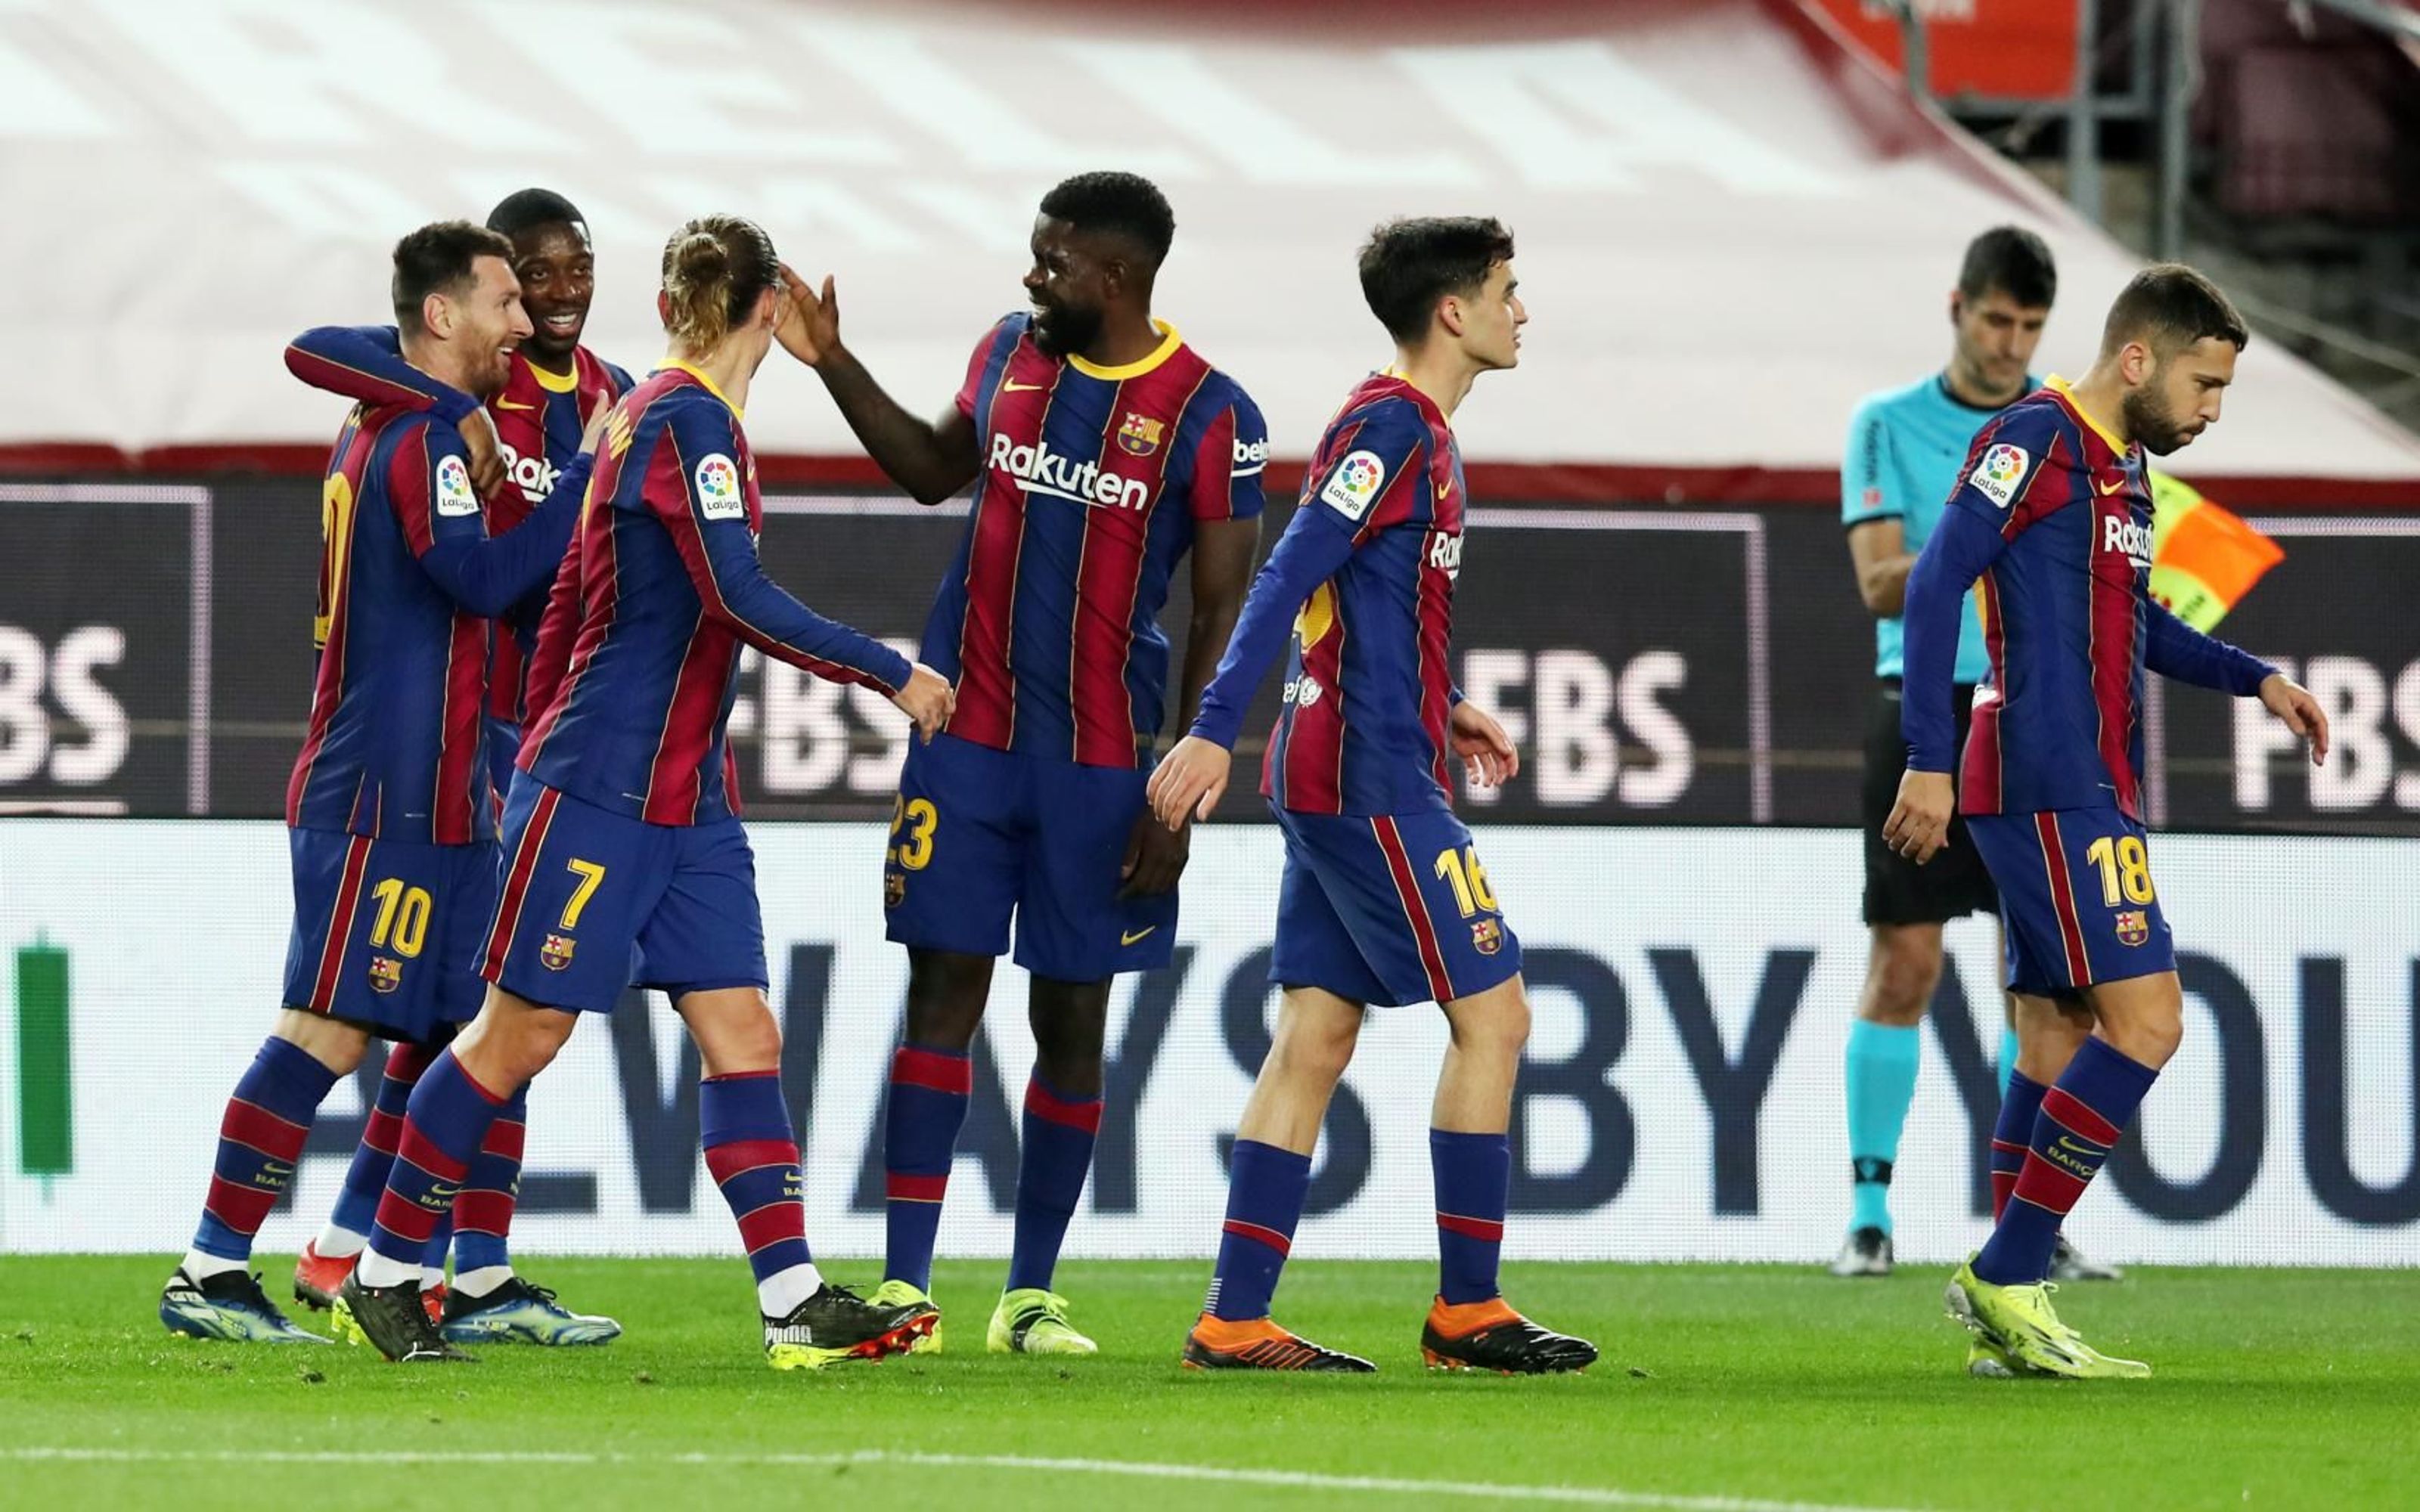 The best photos from the win over Athletic at Camp Nou